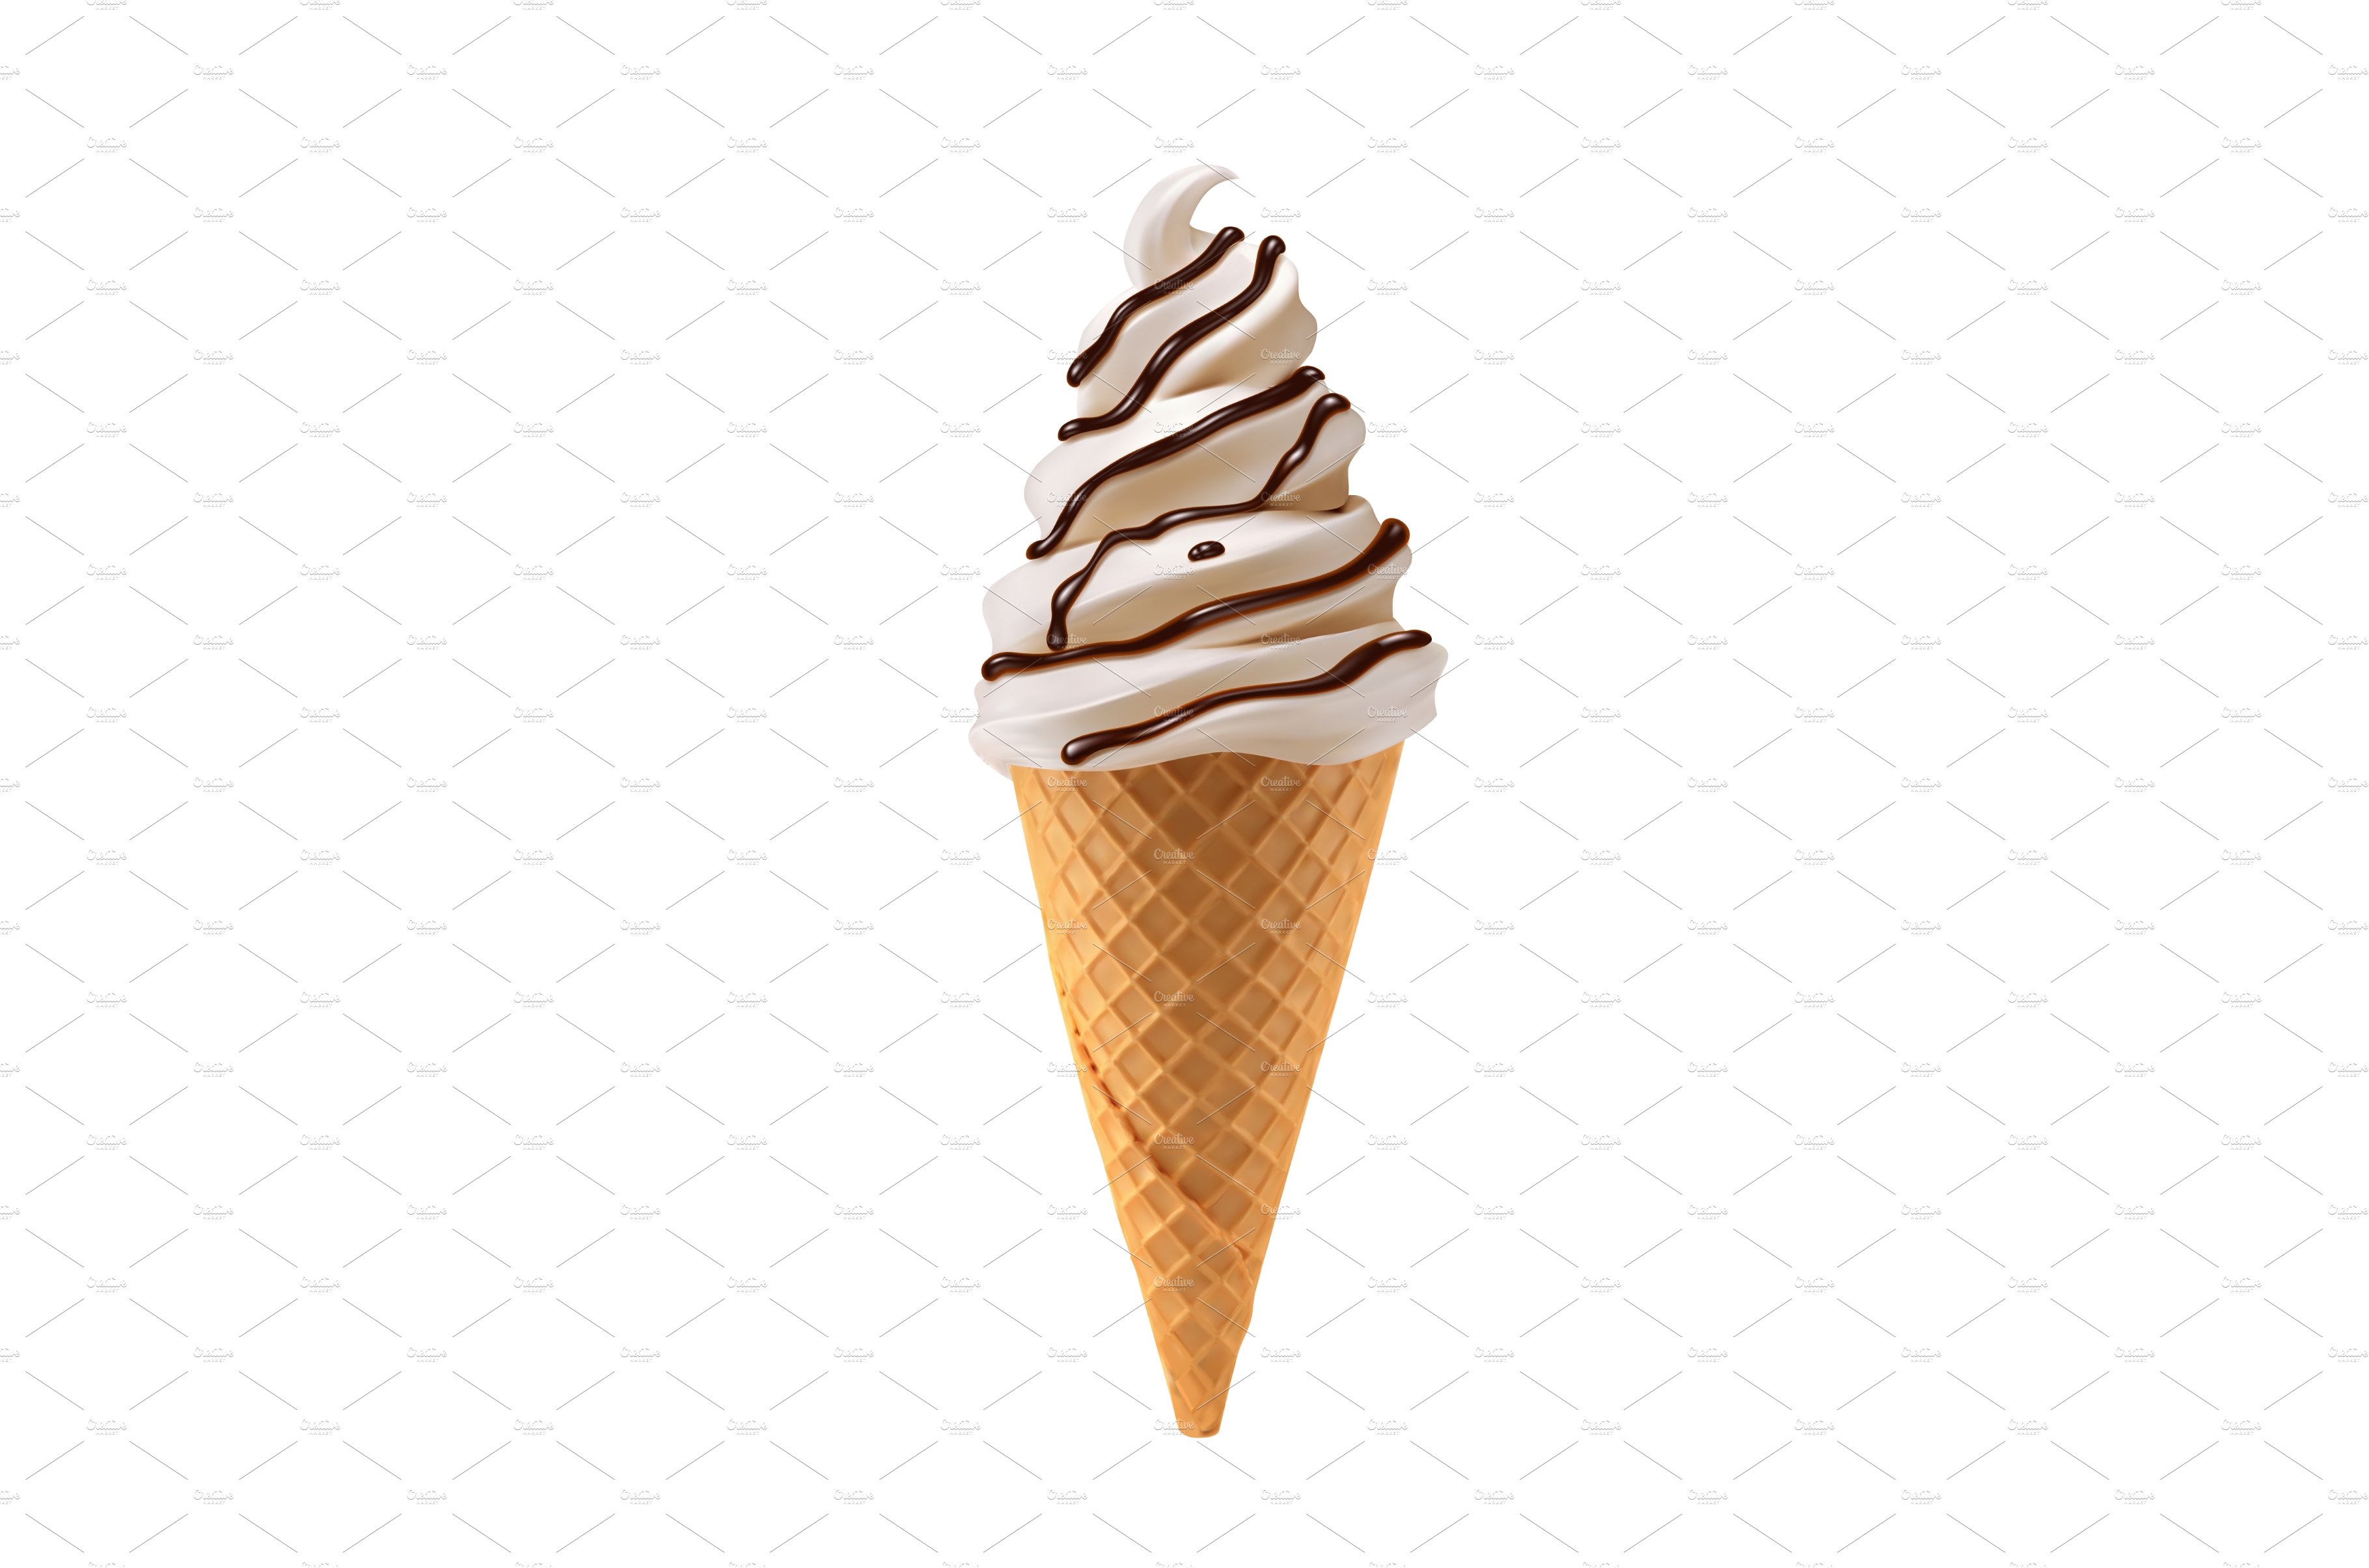 Soft ice cream with chocolate drip cover image.